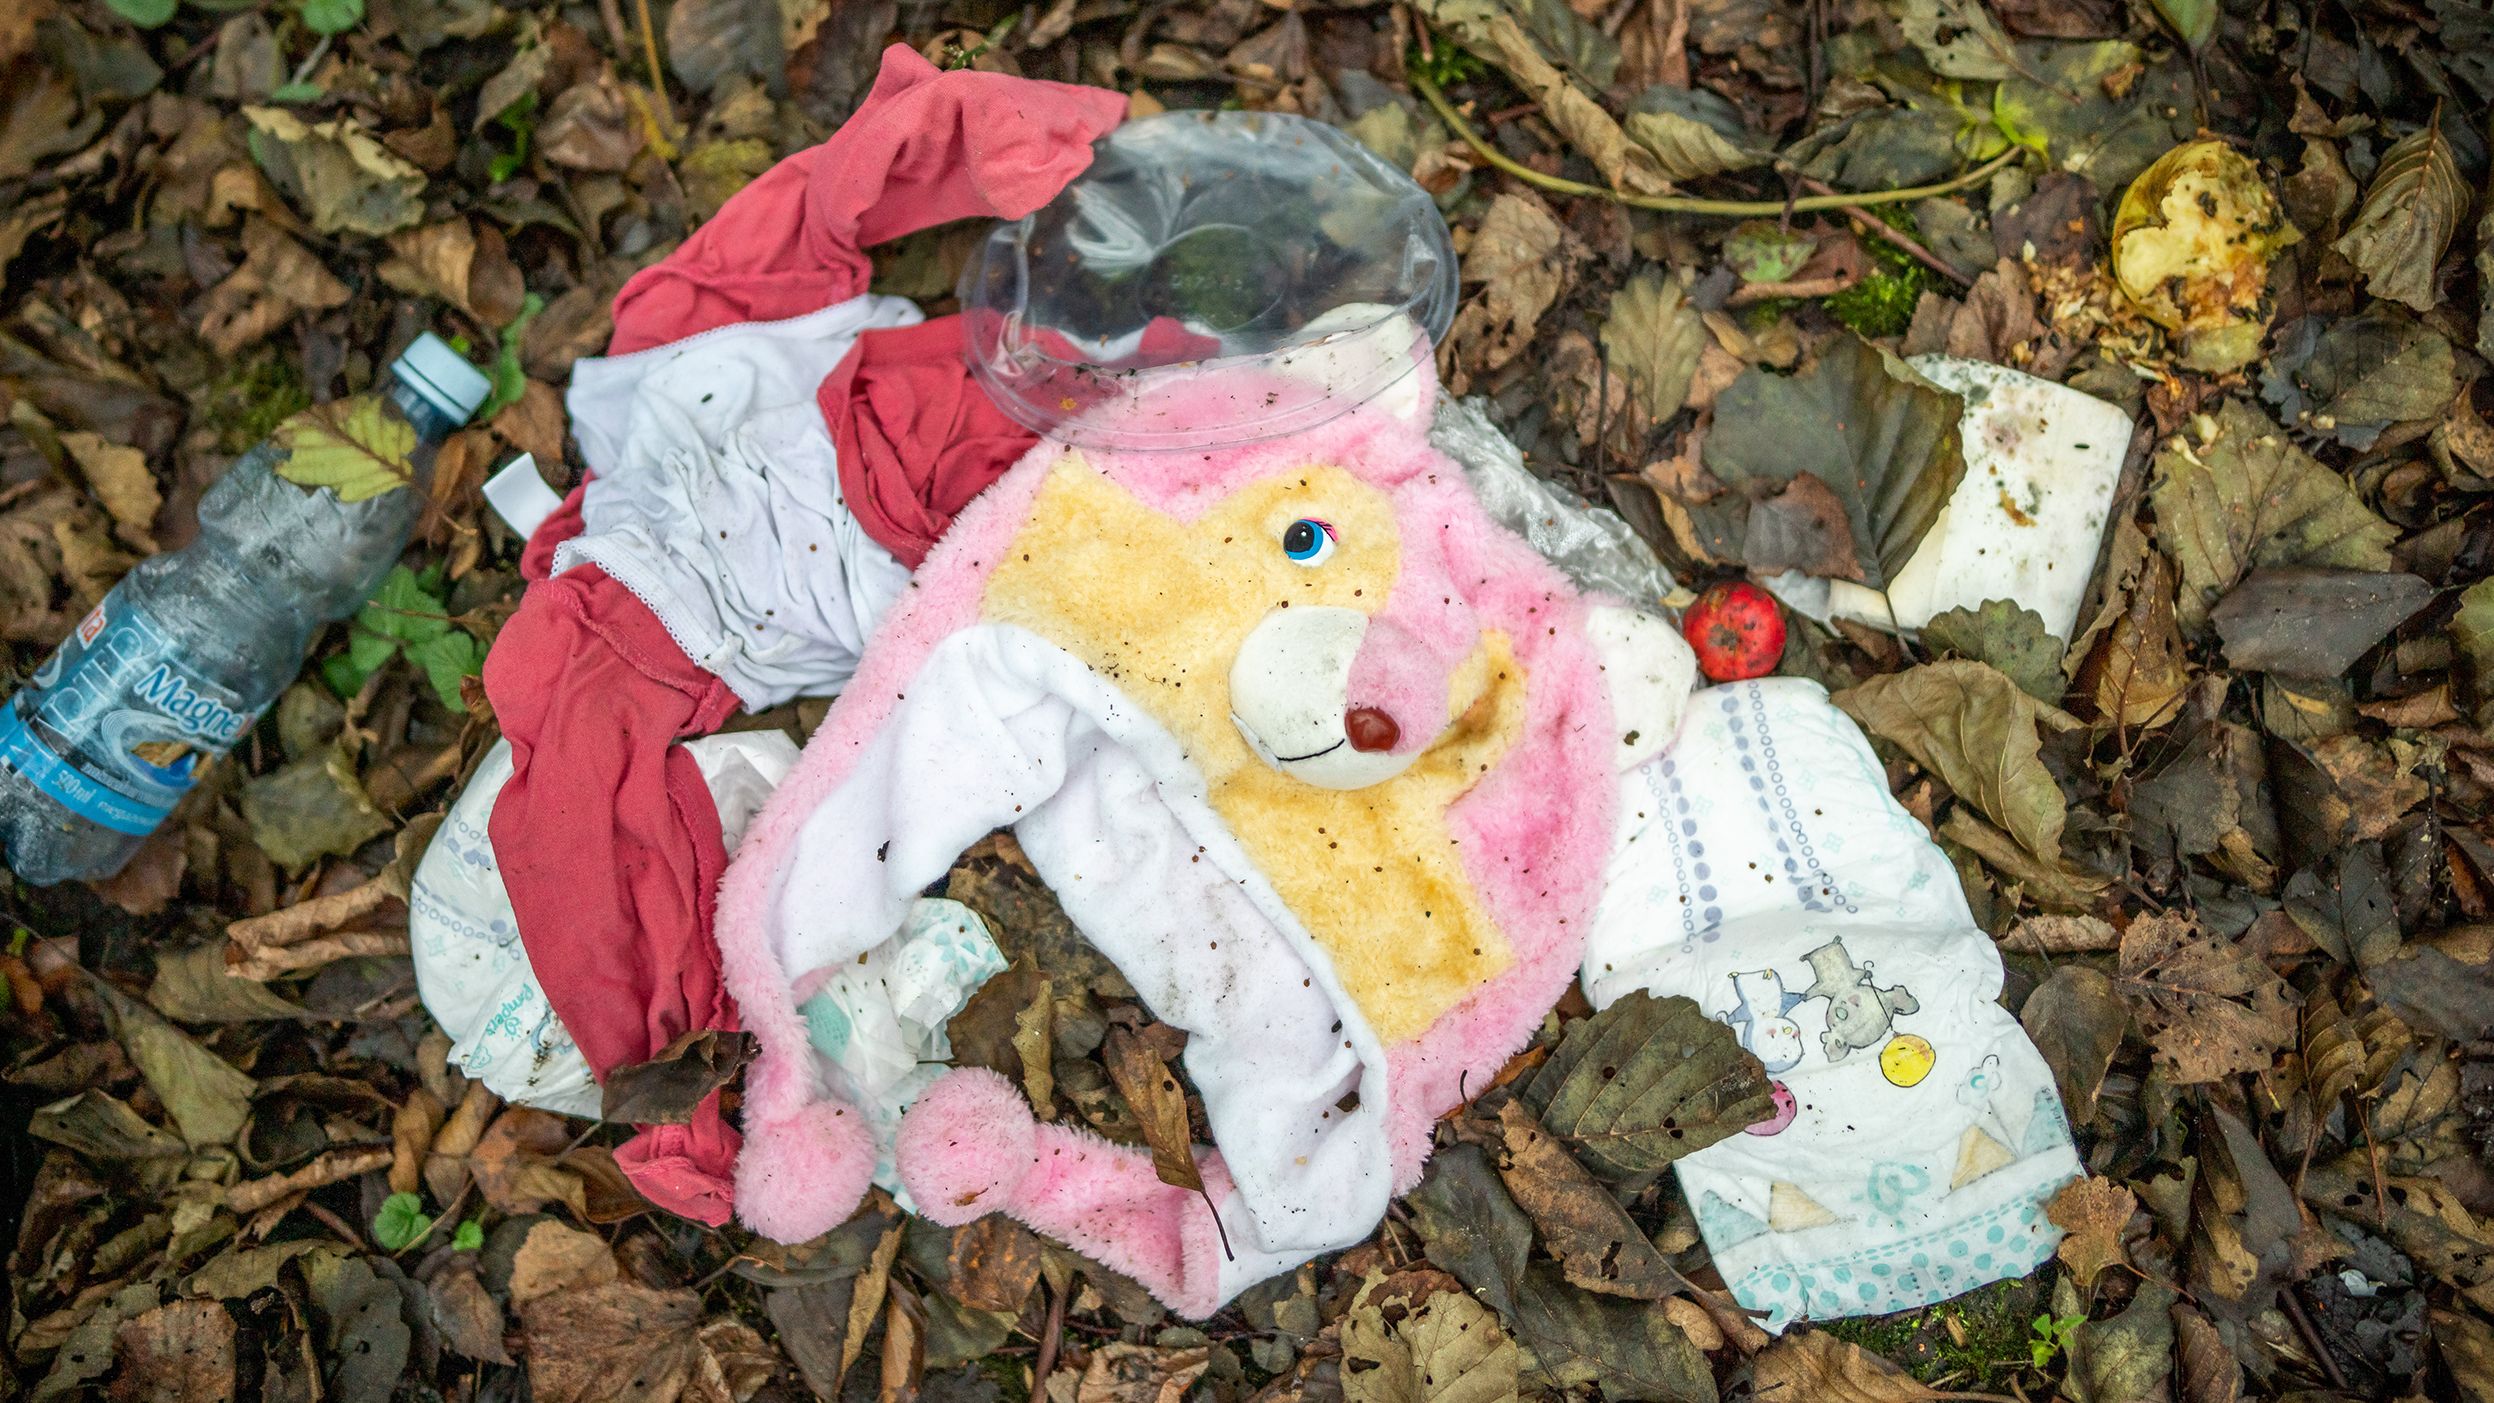 A child's cap, diapers and clothing lie in an abandoned migrant camp on Thursday, November 11.